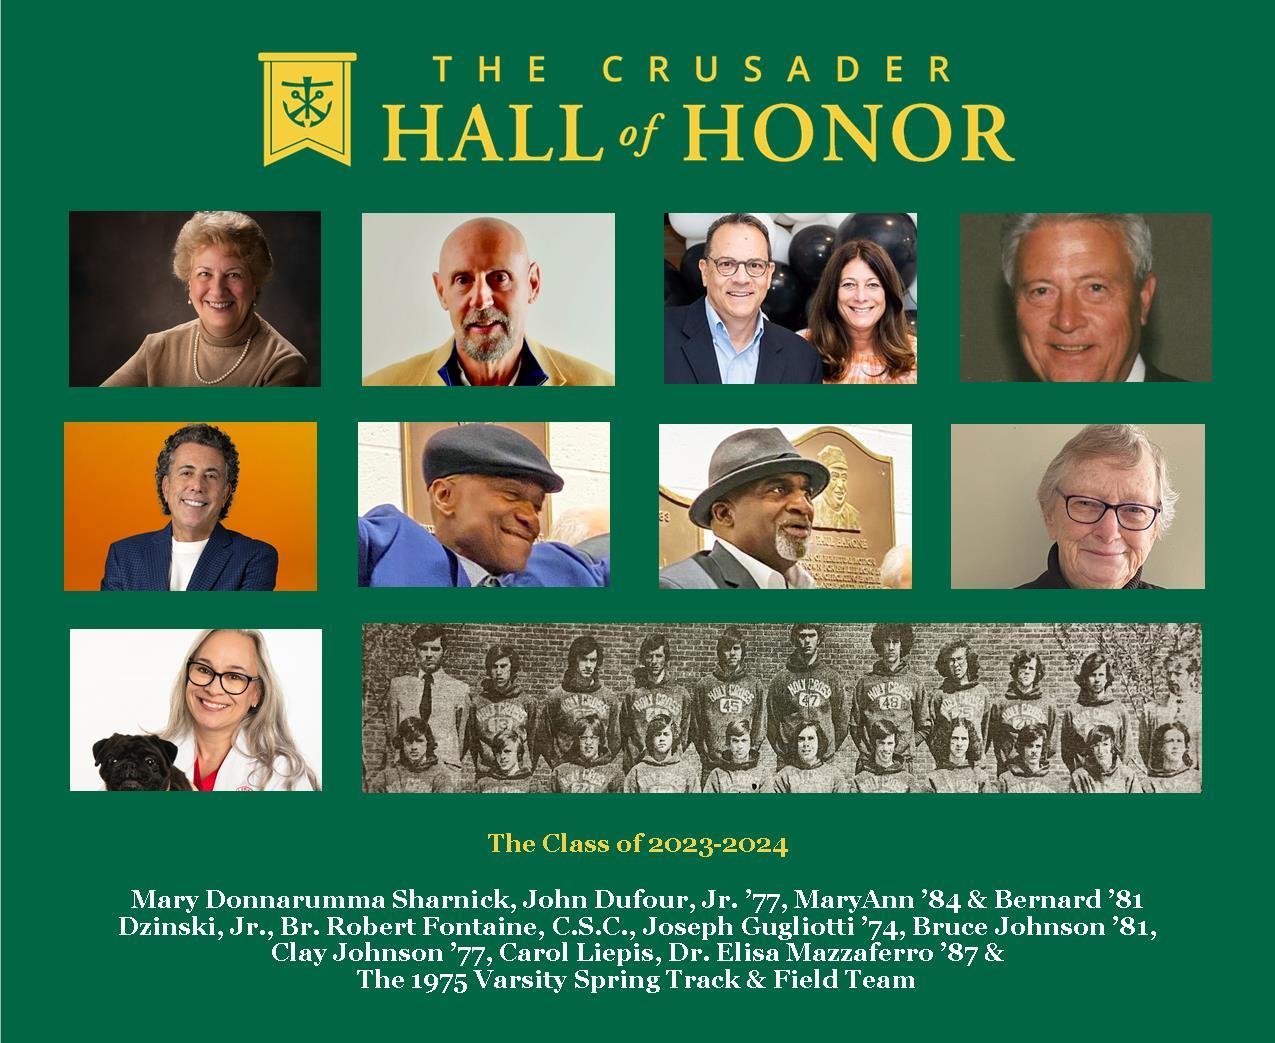 Alumni, Parents & Former Faculty to be Recognized at the 2023-2024 Crusader Hall of Honor 